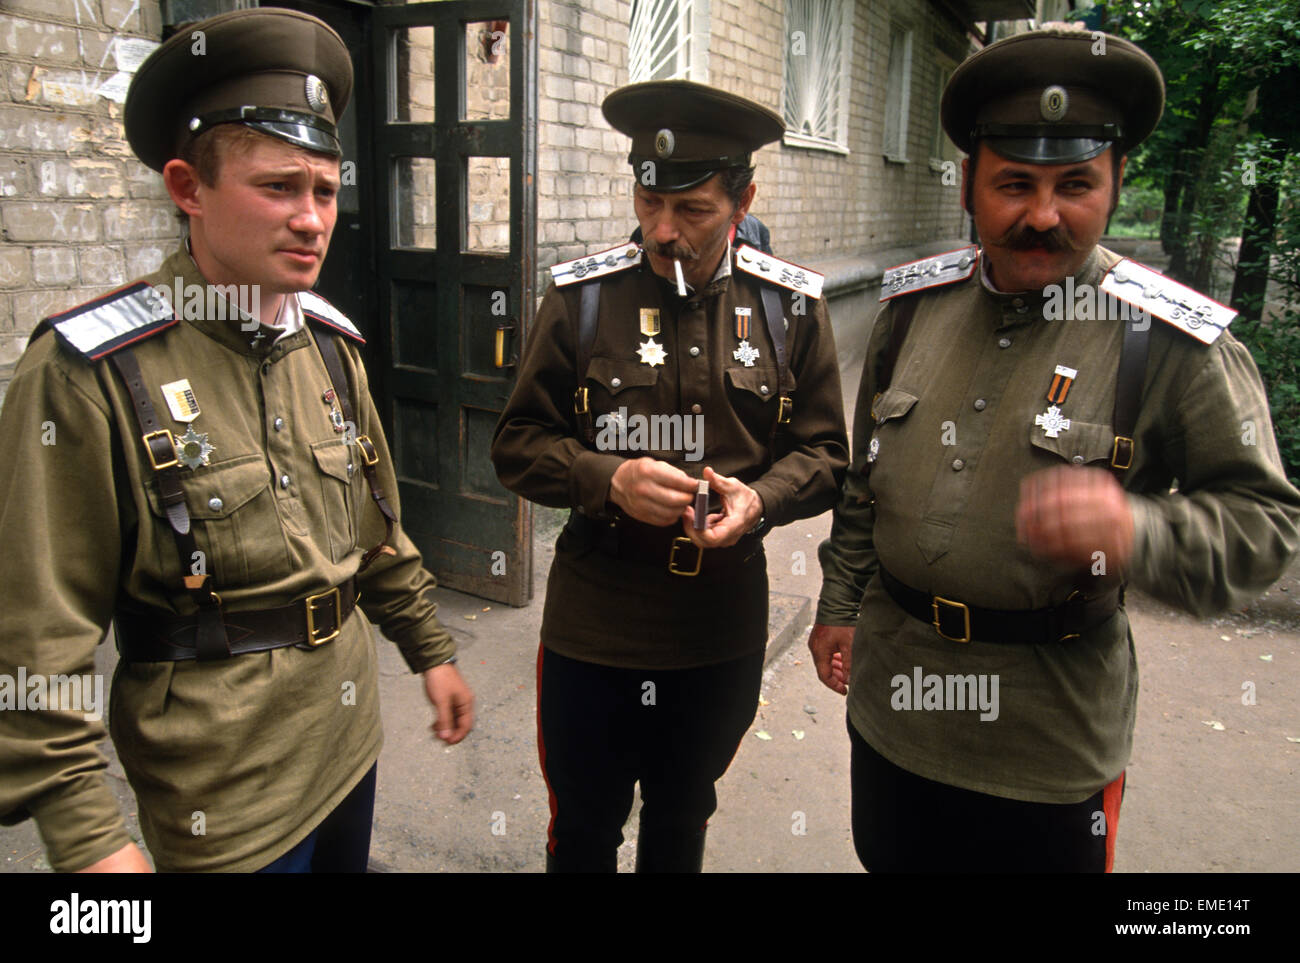 A Russian Don Cossack family gather outside their apartment building in Rostov-on-Don, Russia. The men are participating in the annual Cossack Festival gathering of units from around Russia. Stock Photo